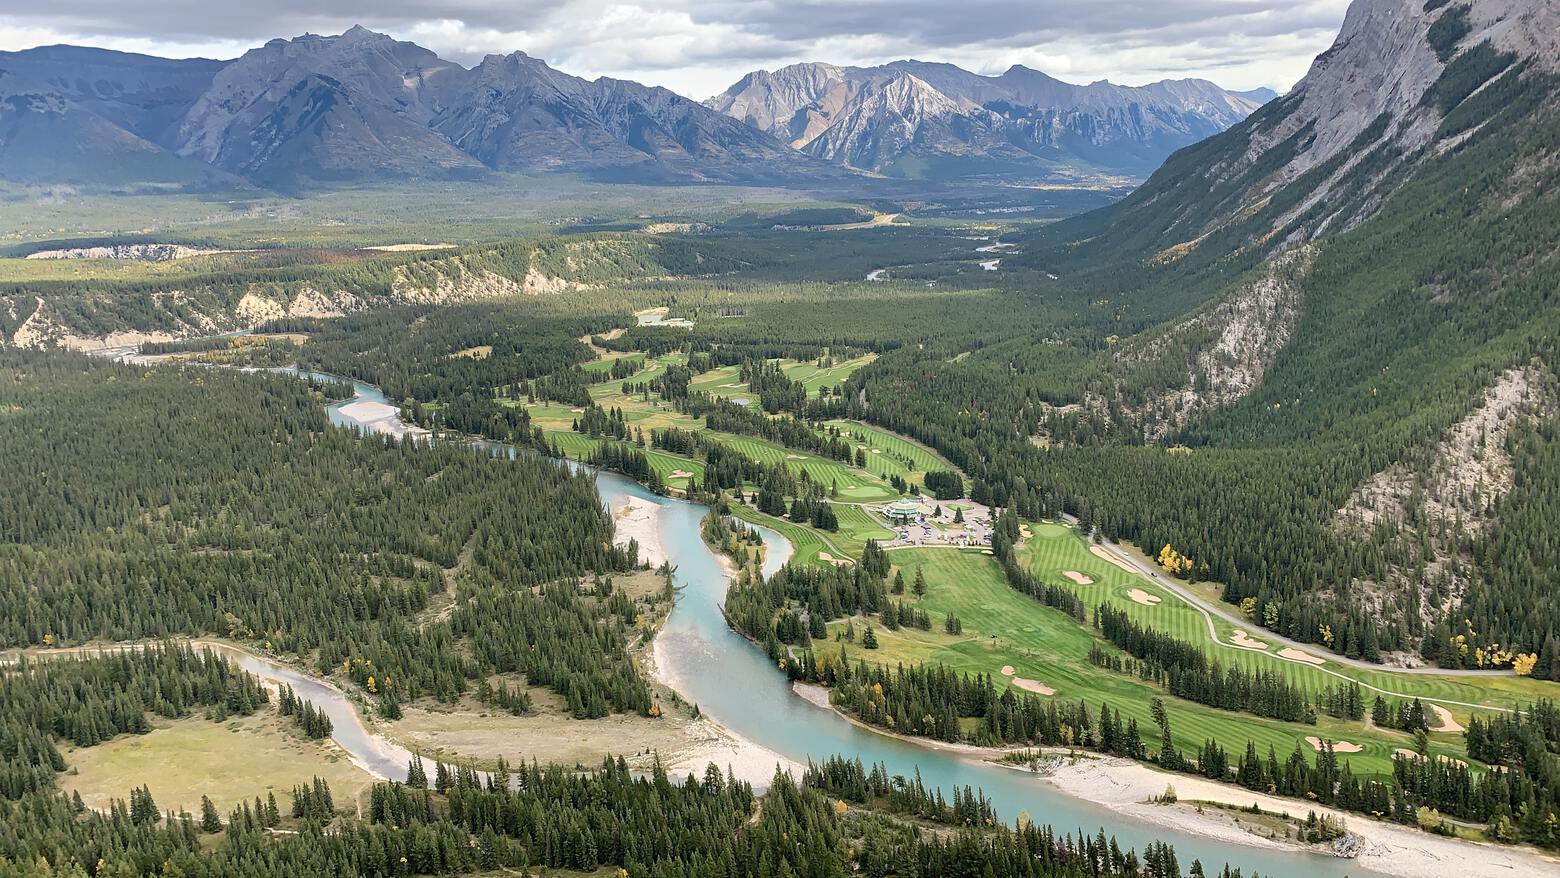 View of the Bow River & the Banff Springs Golf Course as seen from the summit of Tunnel Mountain in the town of Banff.